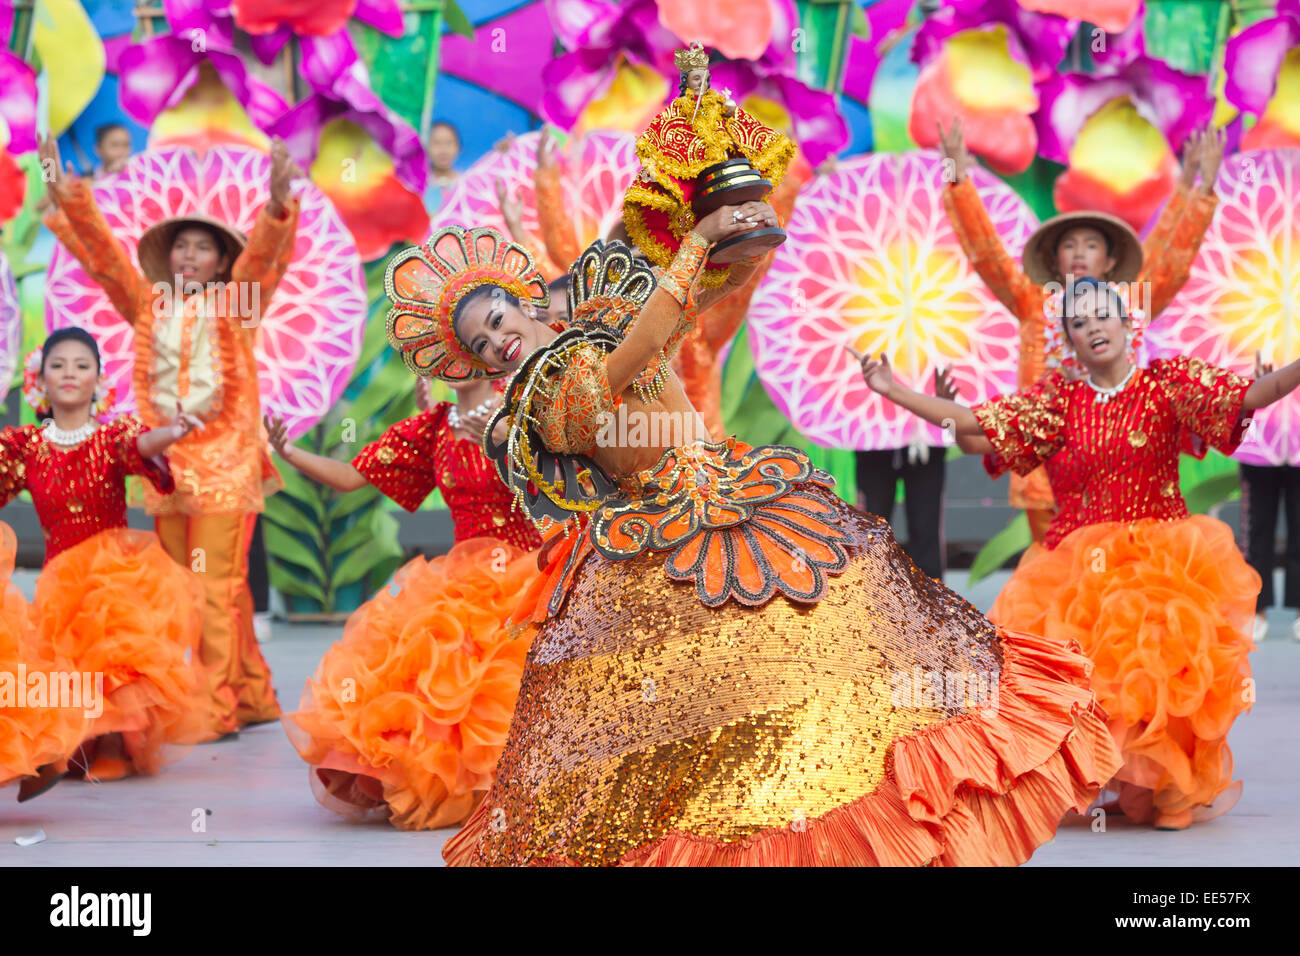 11/01/2015 Cebu City - Sinulog,one of the largest festivals in the Philippines takes place over a nine day period in January. Stock Photo